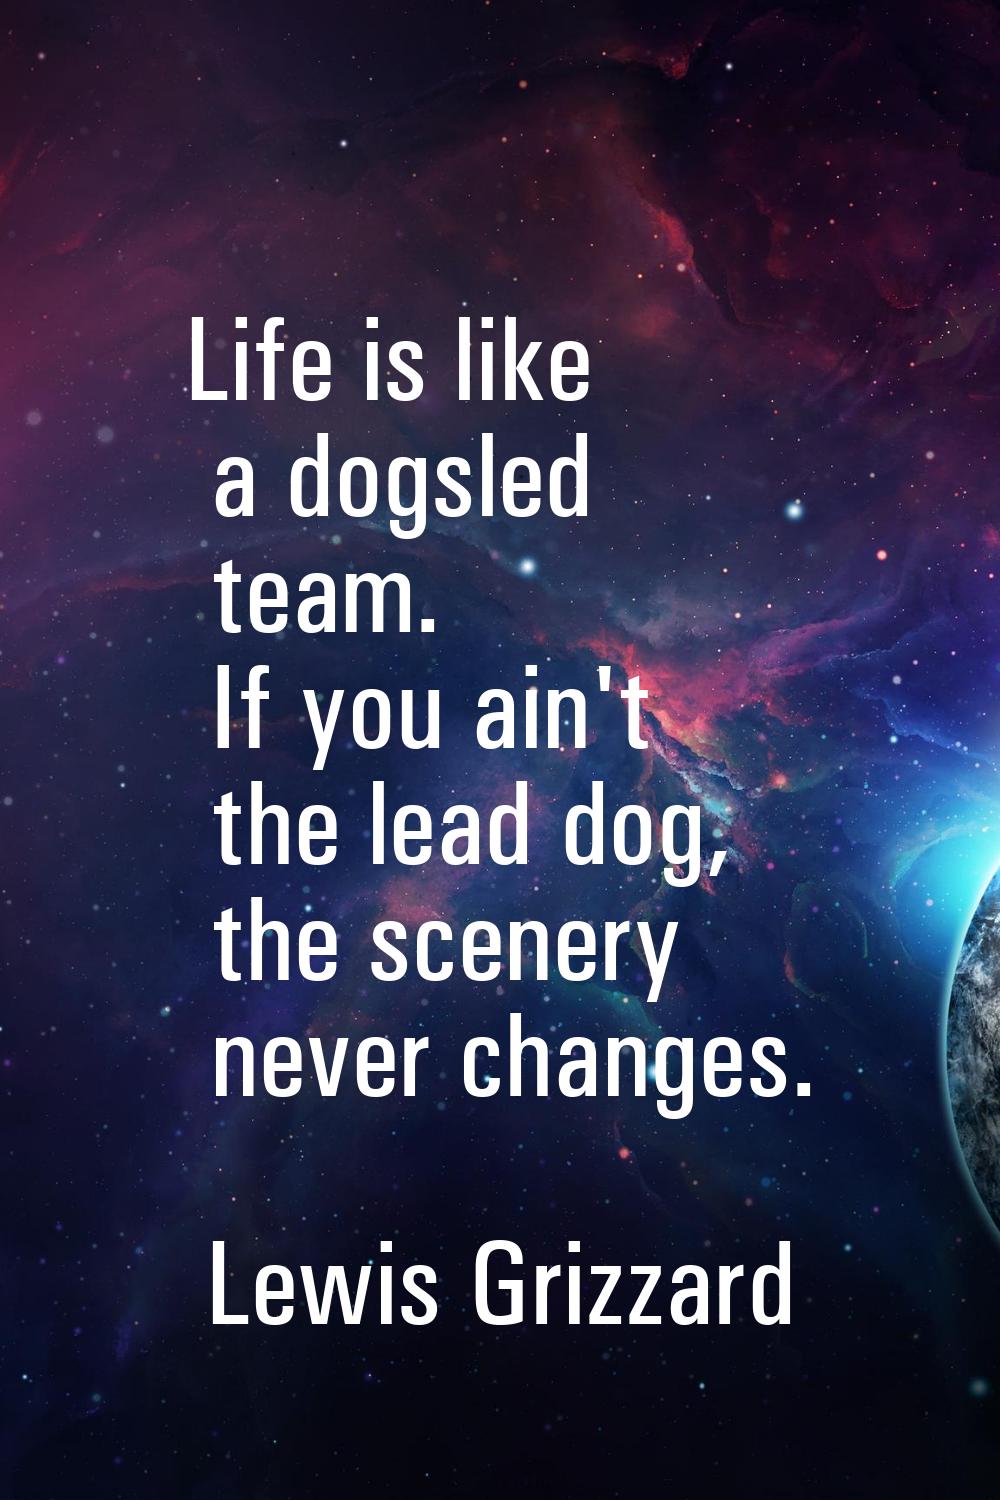 Life is like a dogsled team. If you ain't the lead dog, the scenery never changes.